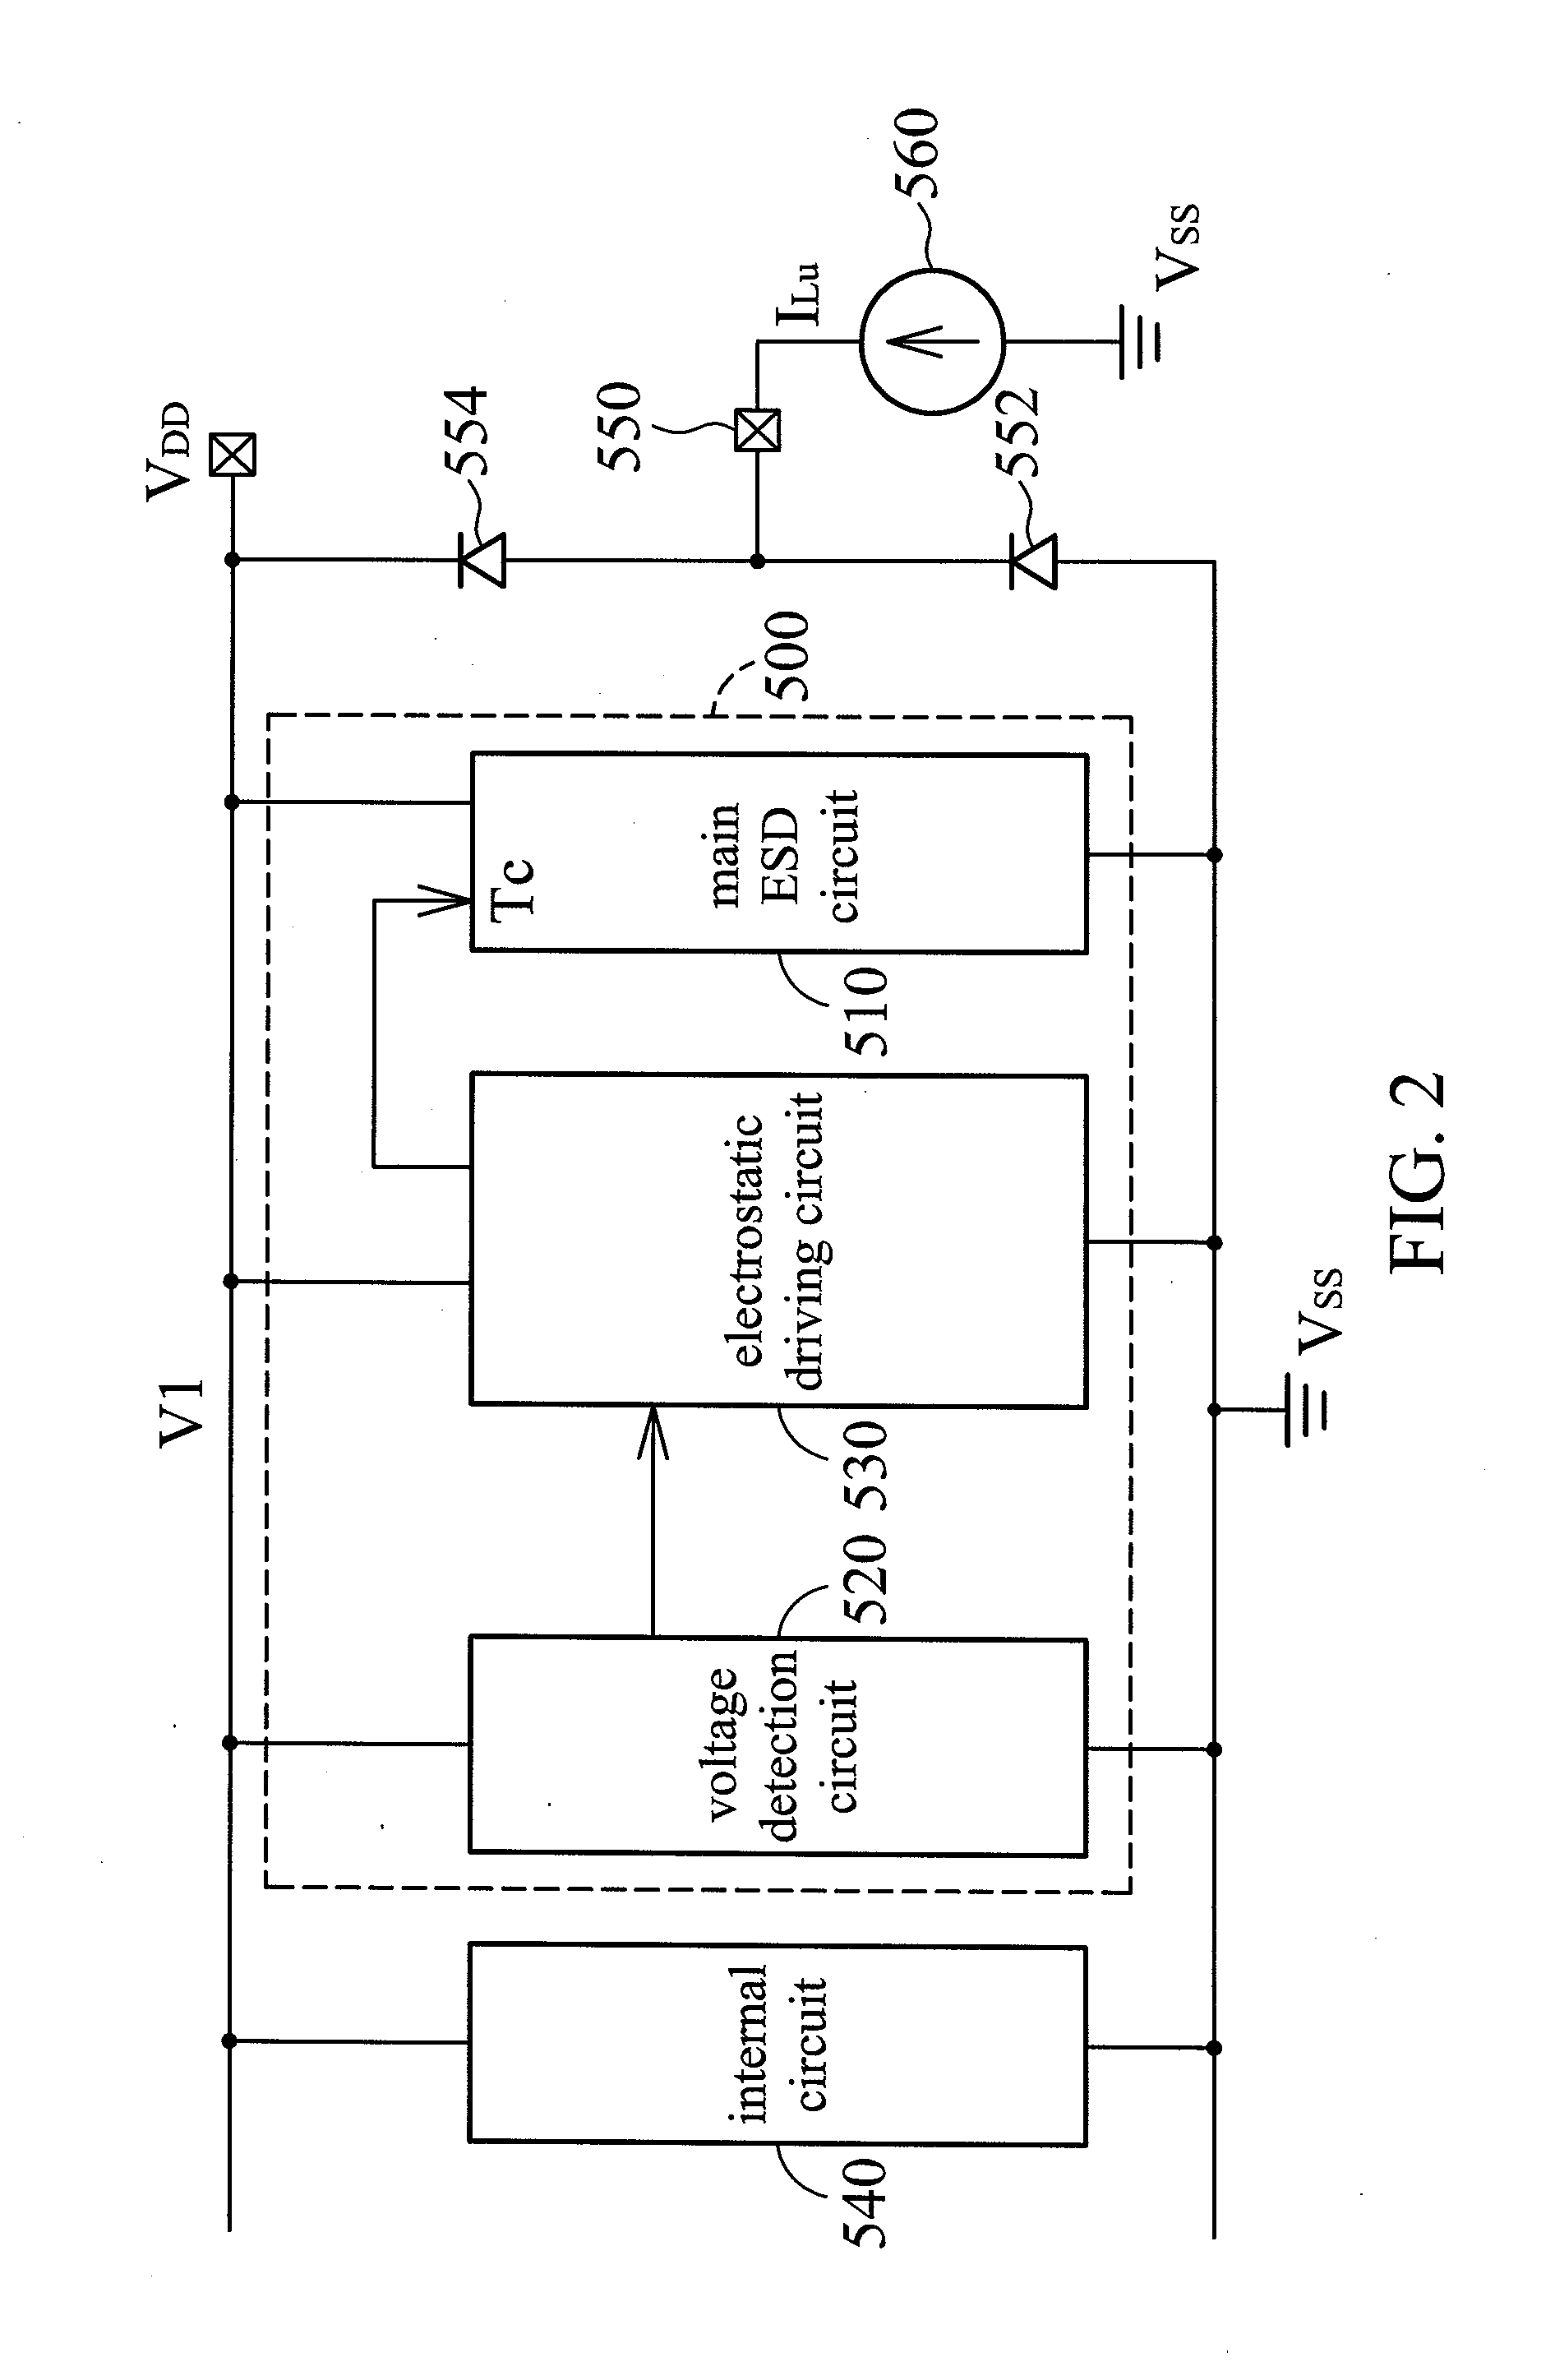 Electrostatic Discharge (ESD) Protection Circuit with EOS and Latch-Up Immunity